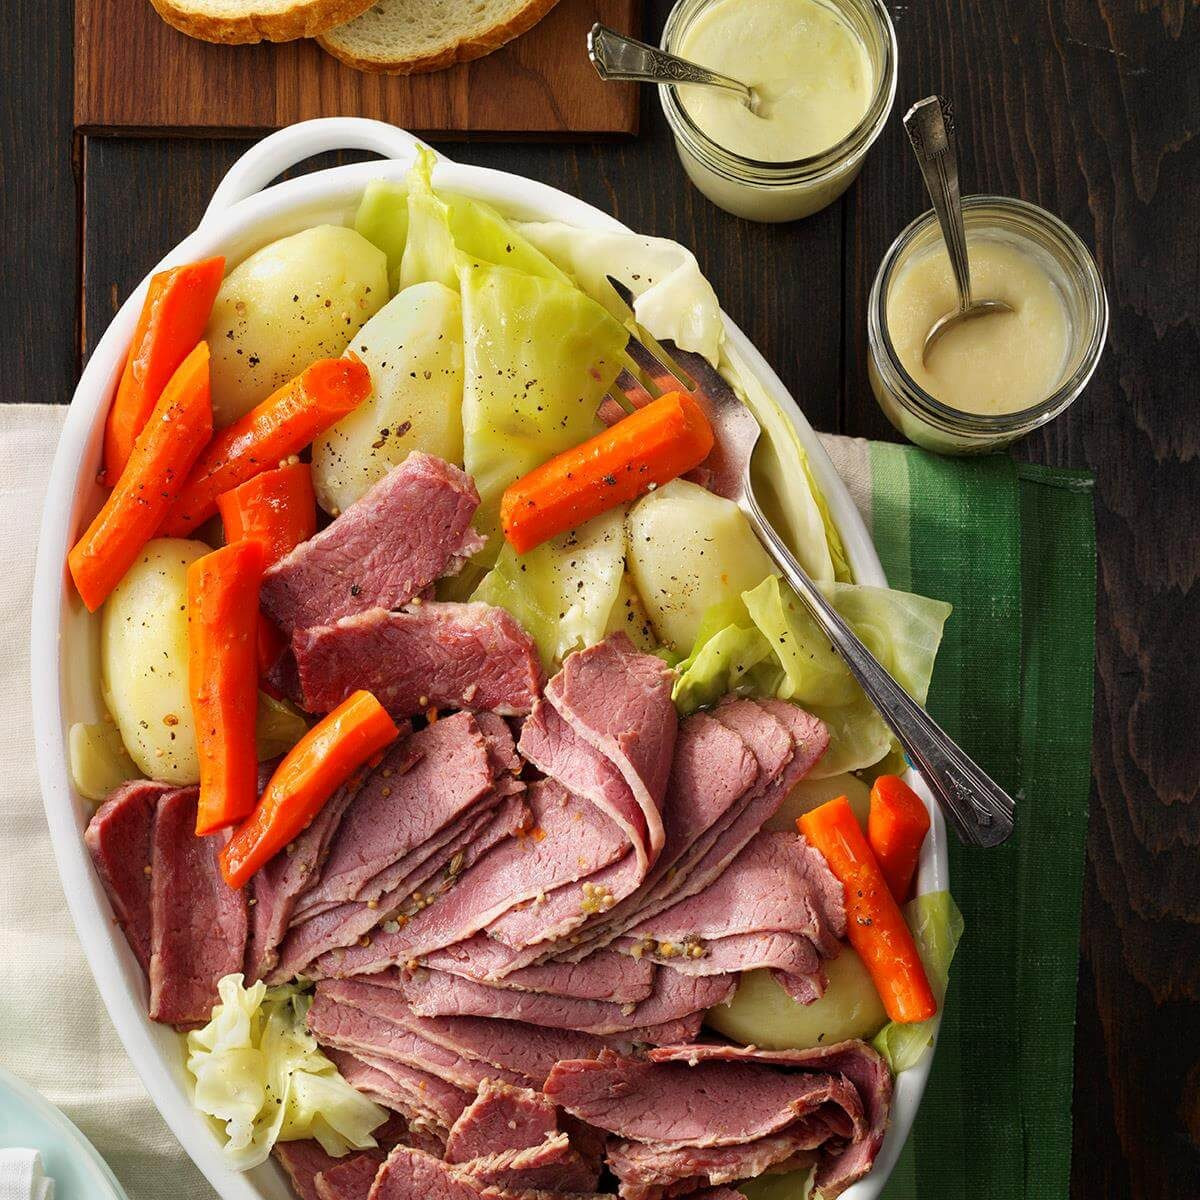 Recipe for Corn Beef and Cabbage Awesome 22 Corned Beef and Cabbage Recipes to Make All Year